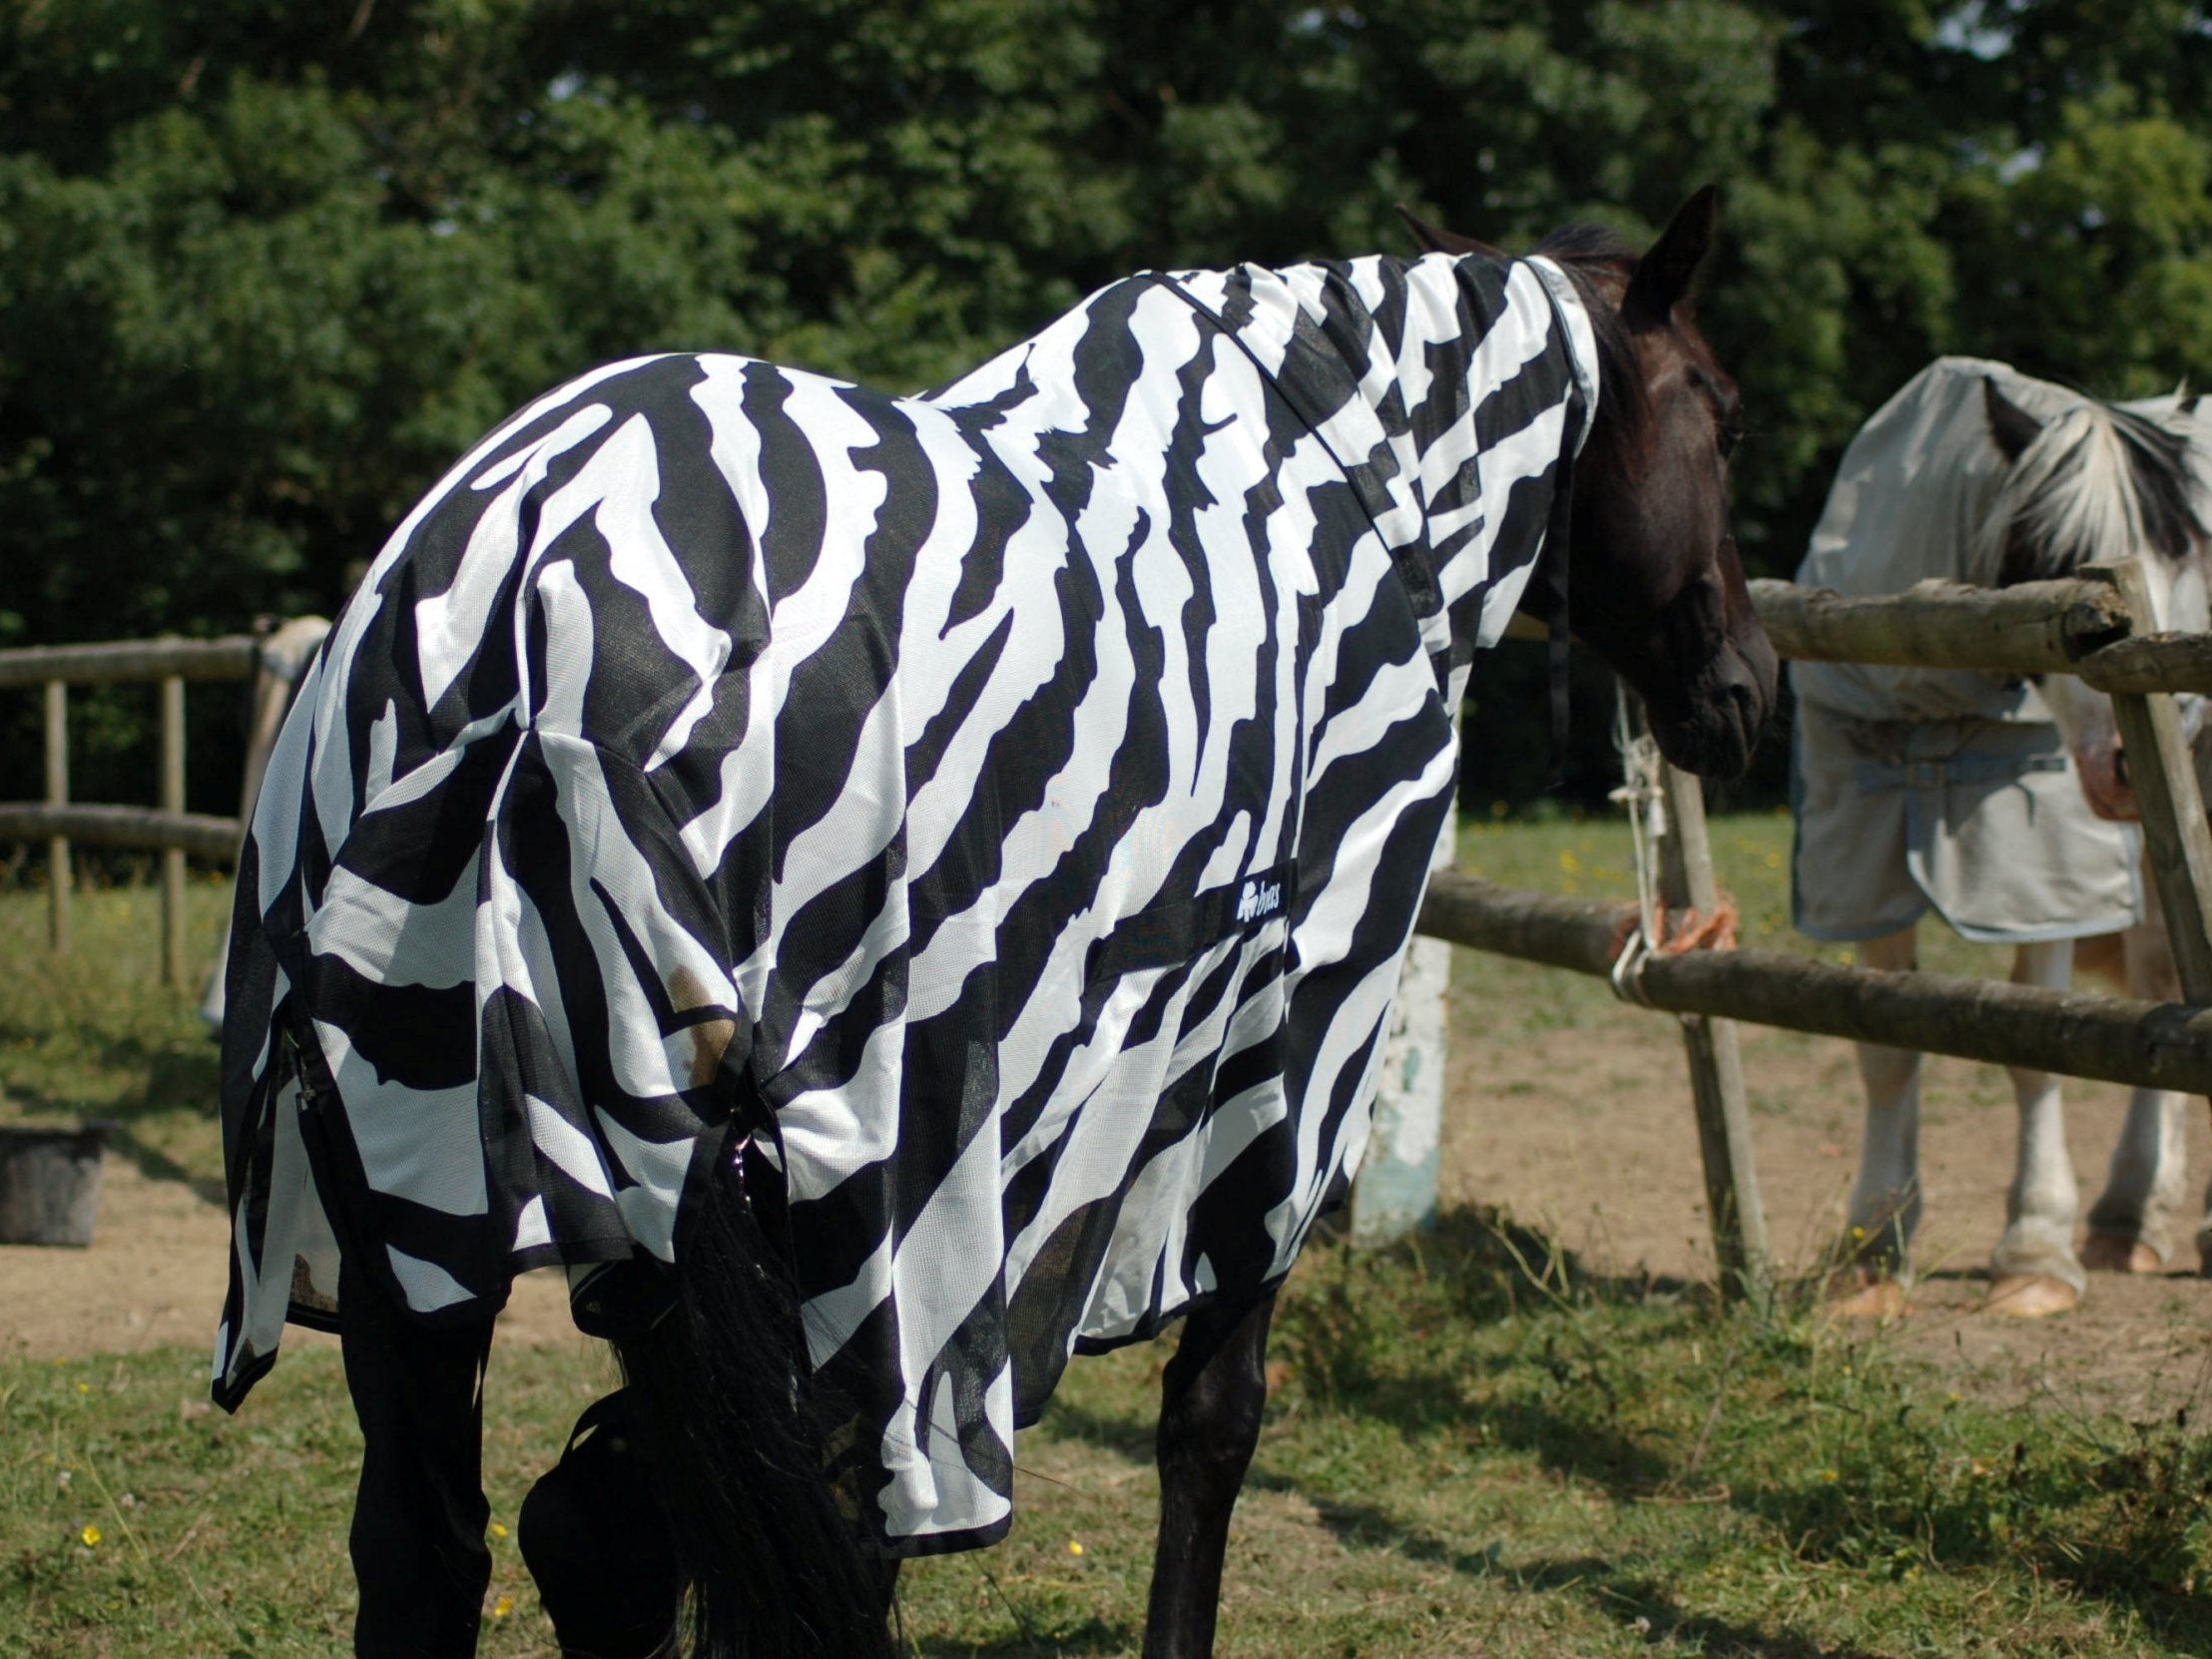 Scientists tested their theory by putting striped coats on horses to mimic the patterns found on zebras